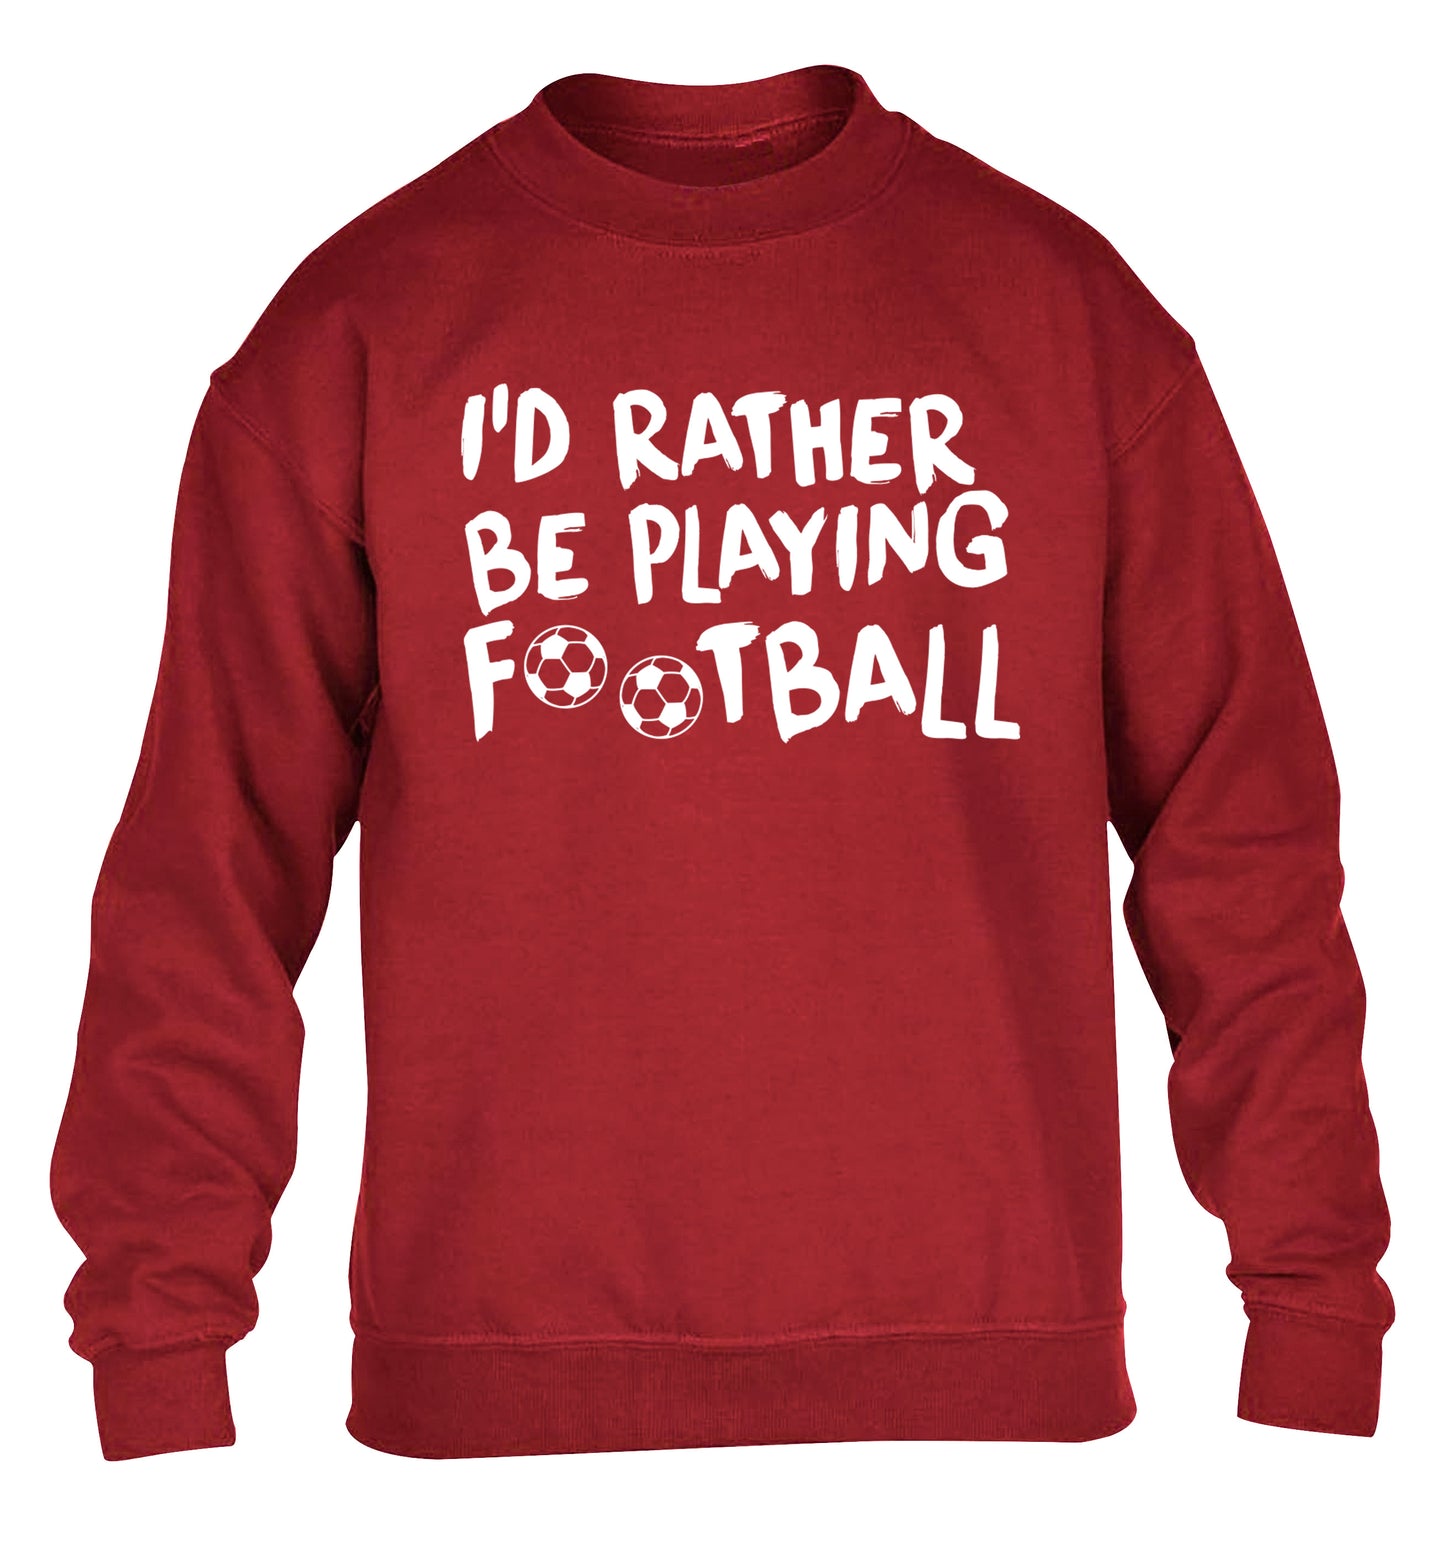 I'd rather be playing football children's grey sweater 12-14 Years